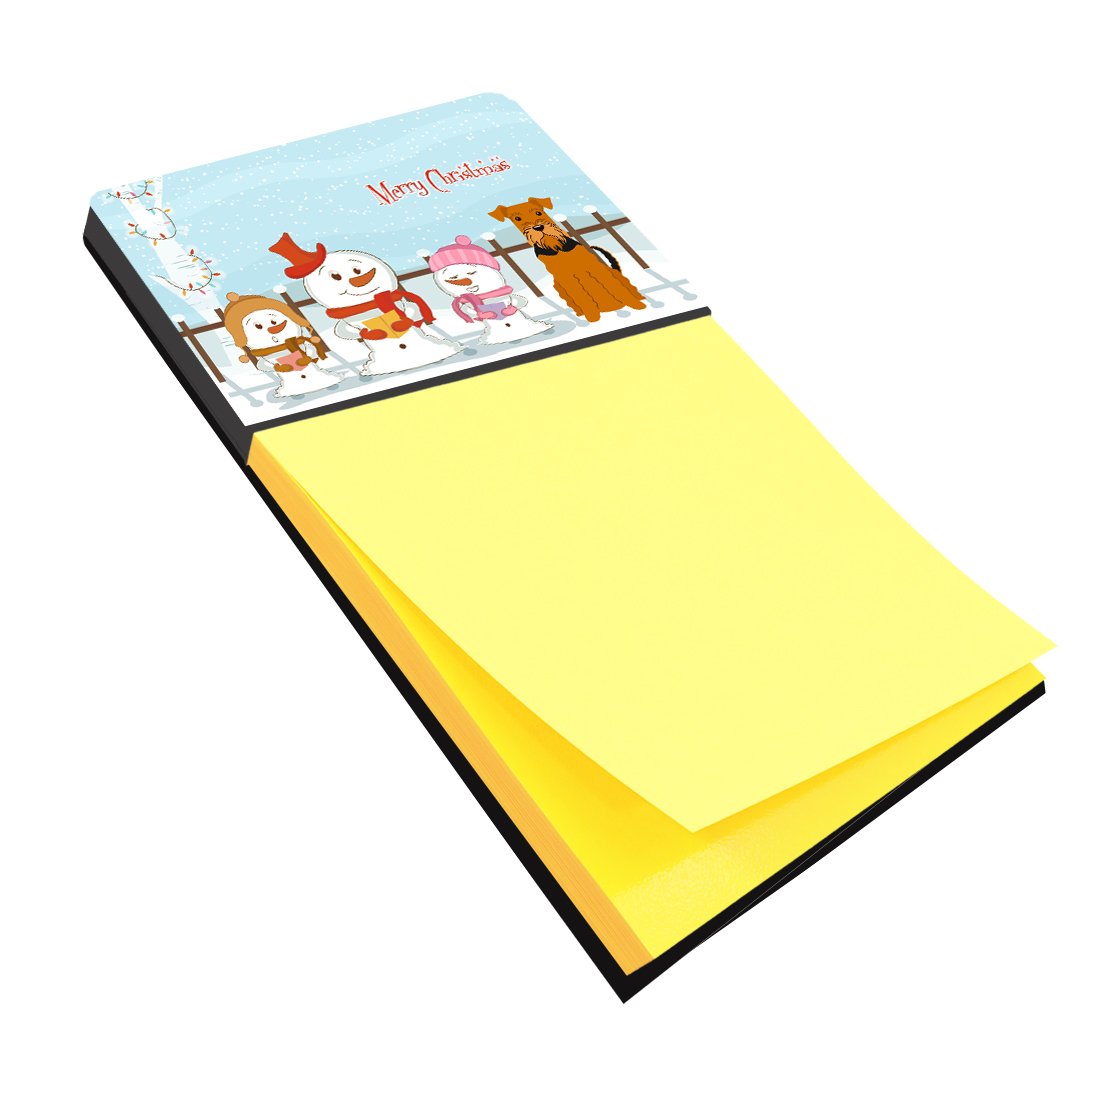 Merry Christmas Carolers Airedale Sticky Note Holder BB2372SN by Caroline's Treasures